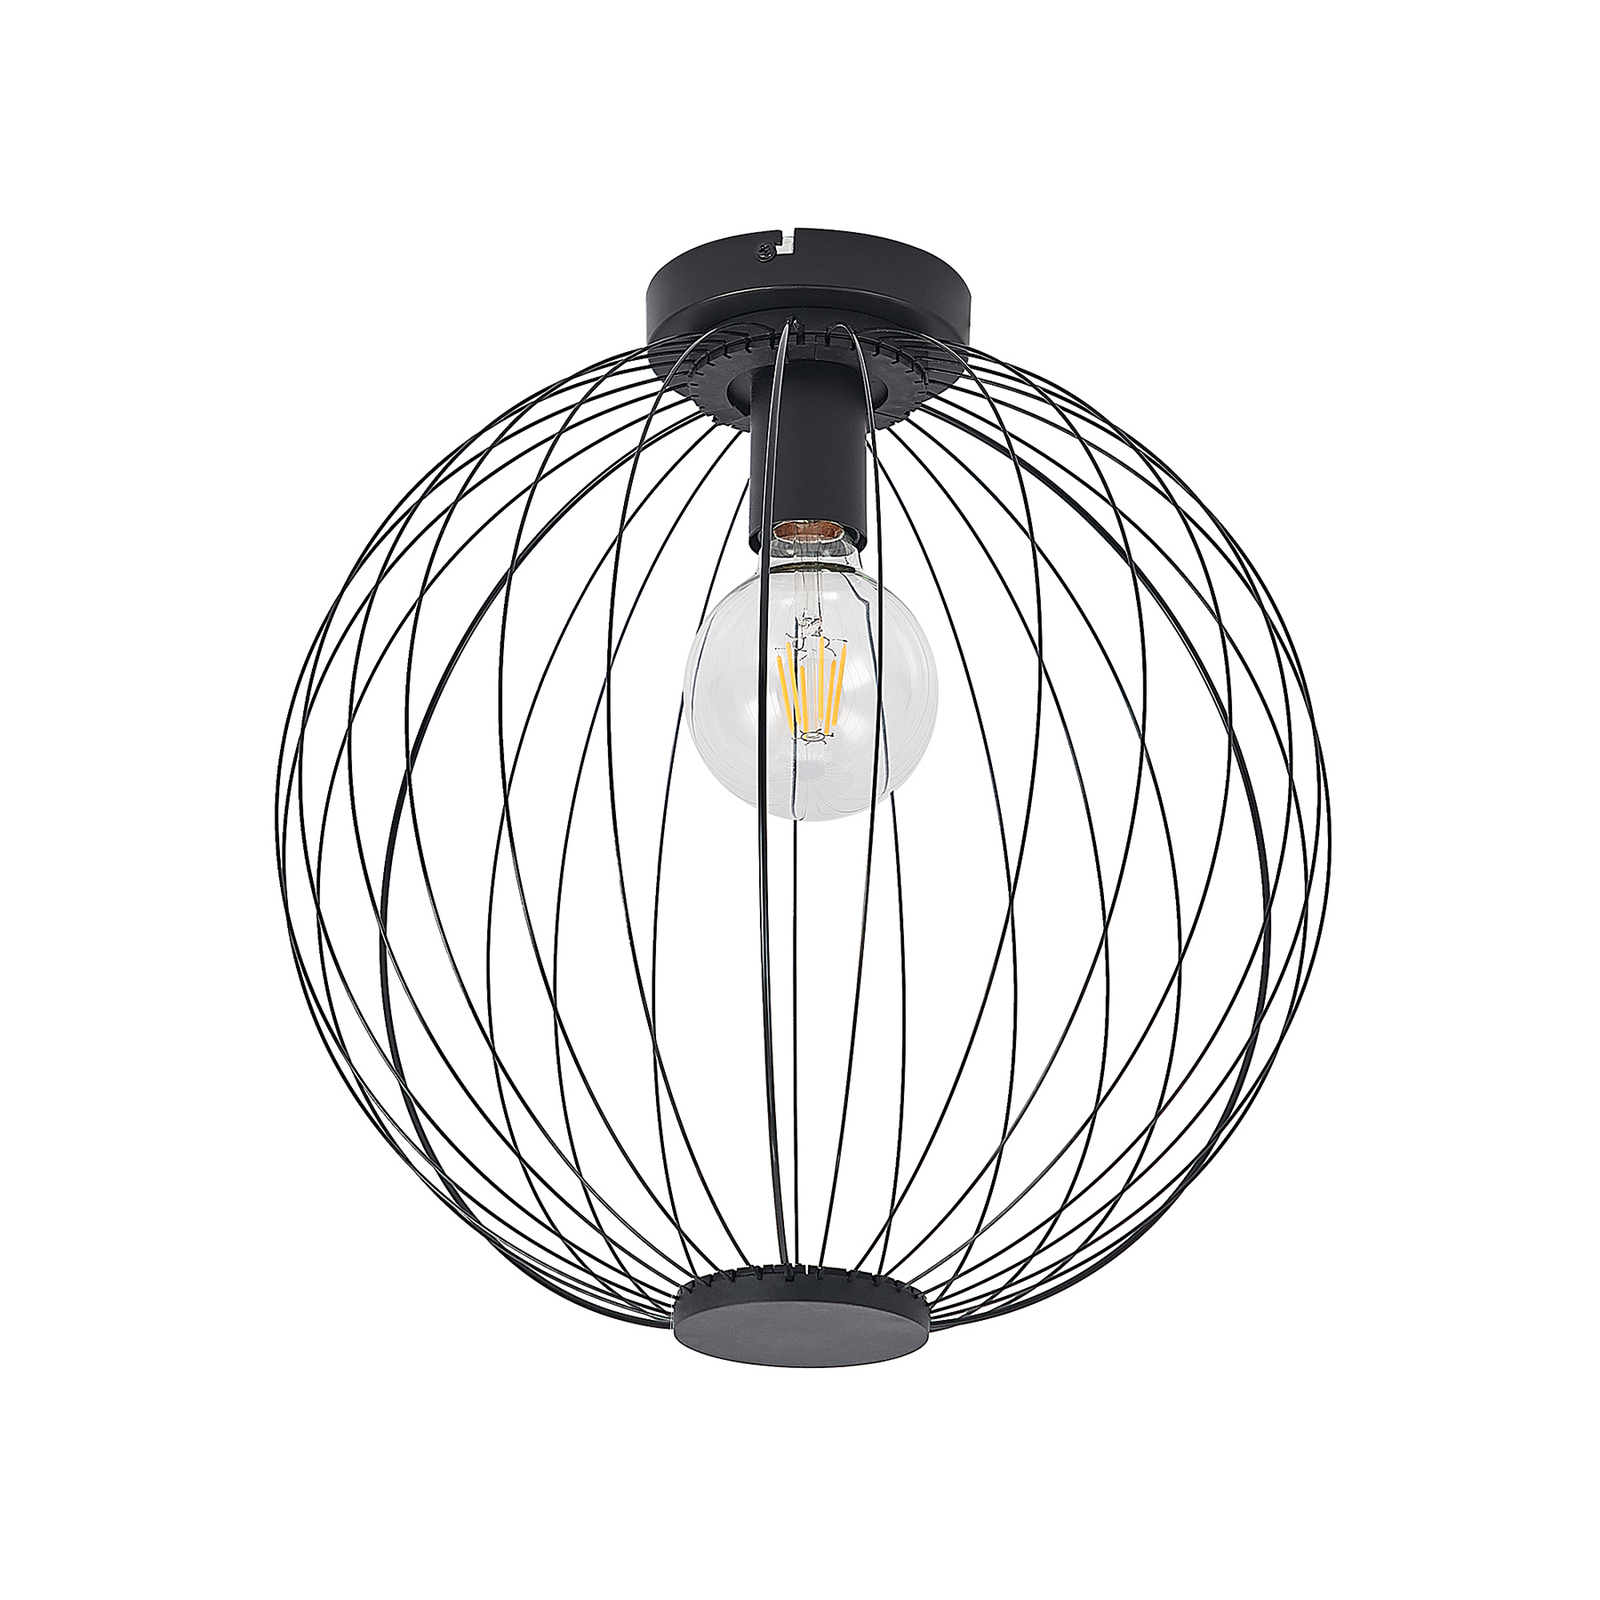 Lindby Rhodri ceiling light in cage shape